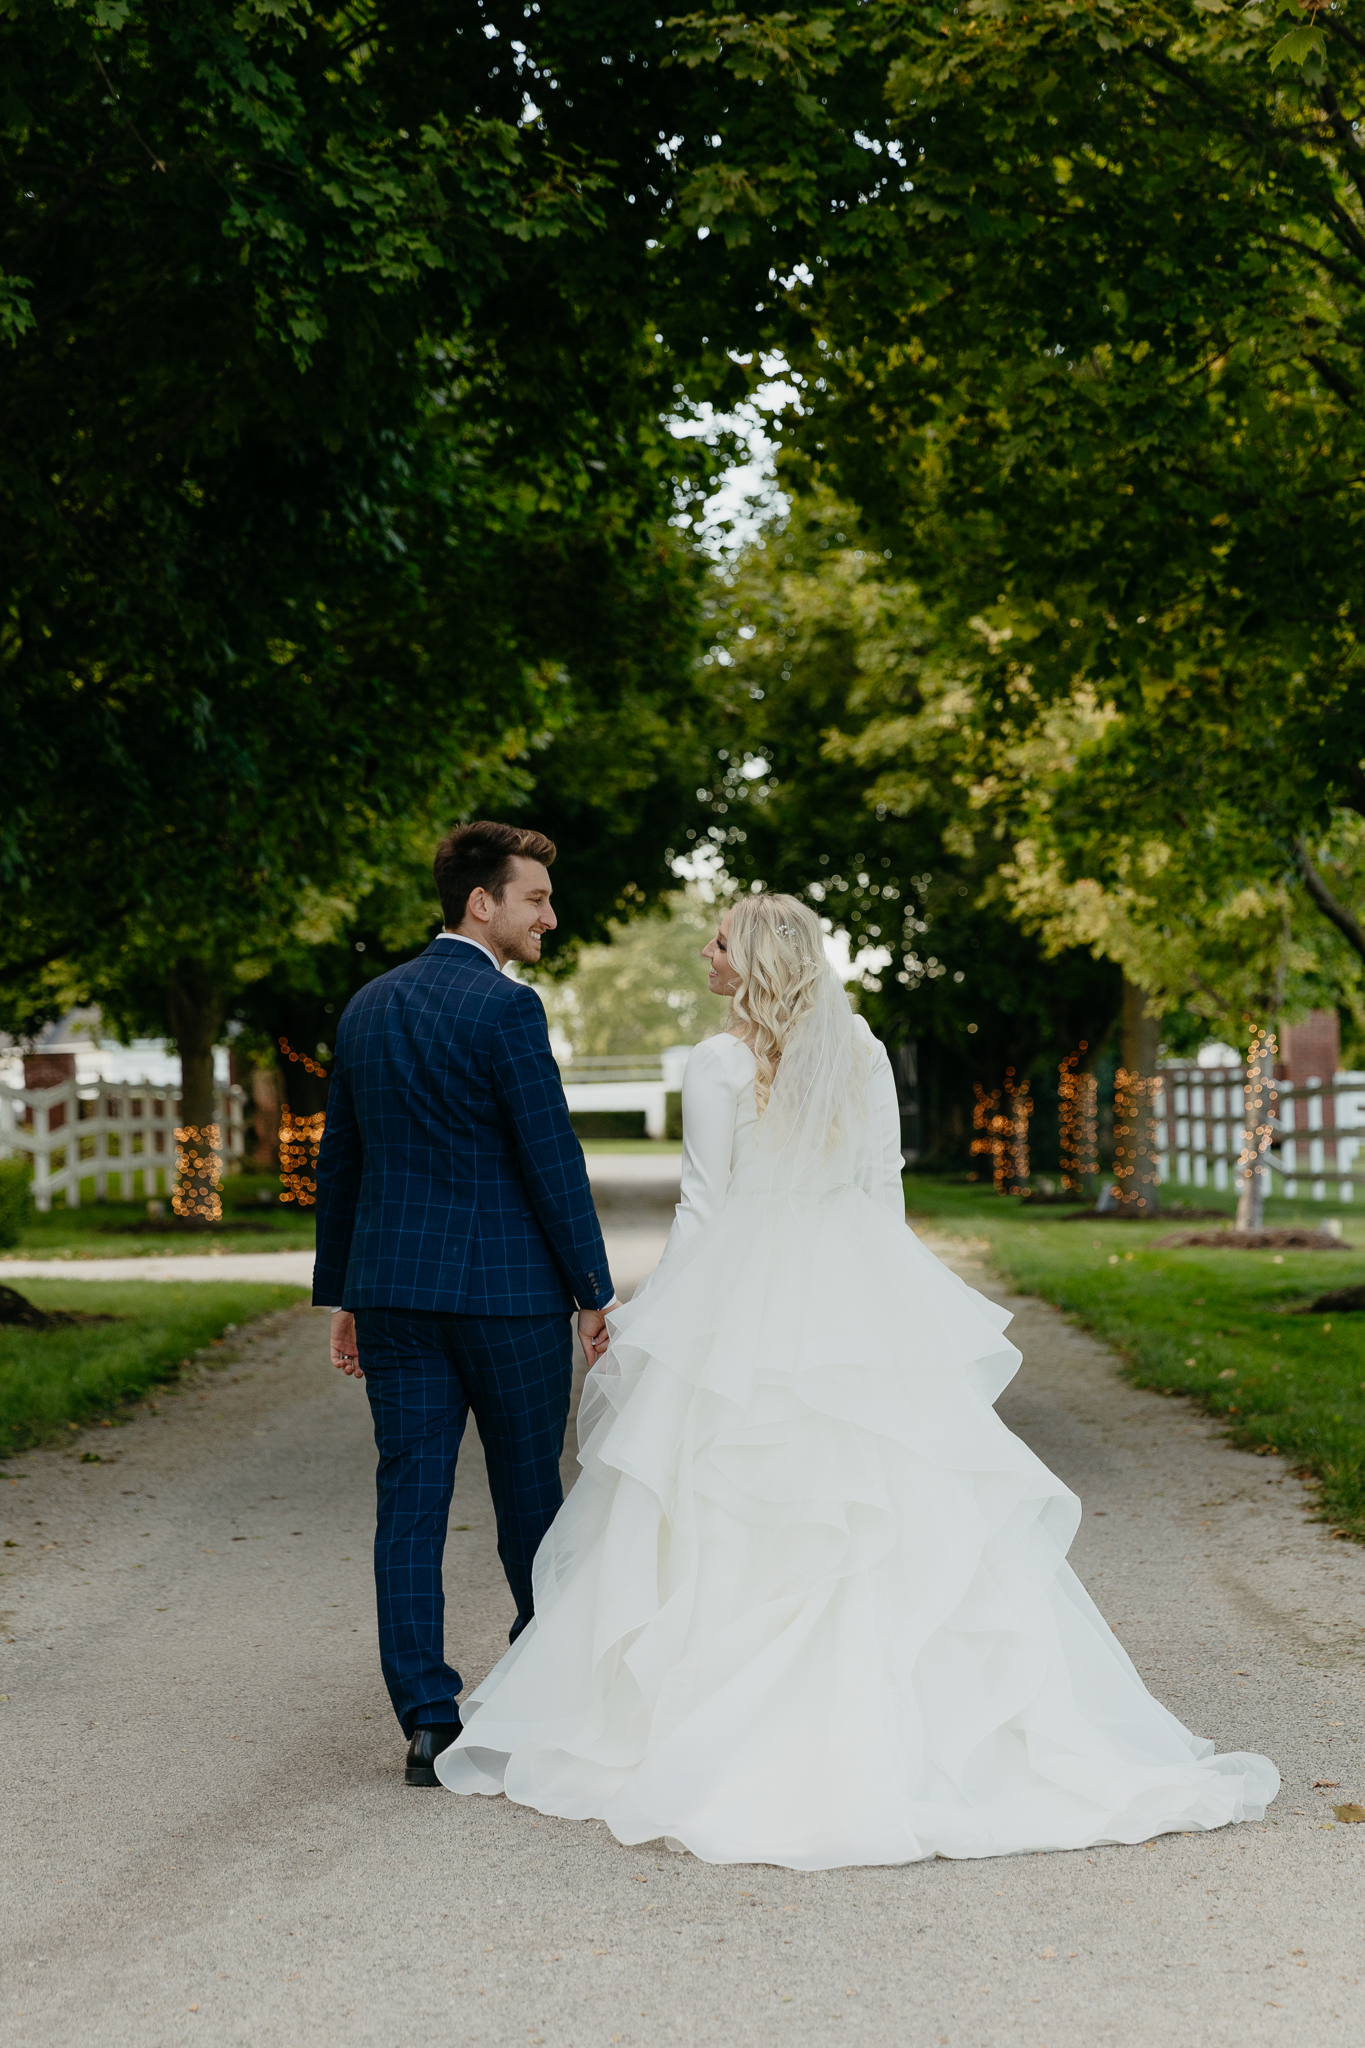 Bride and groom walk down tree lined driveway hand in hand while looking back